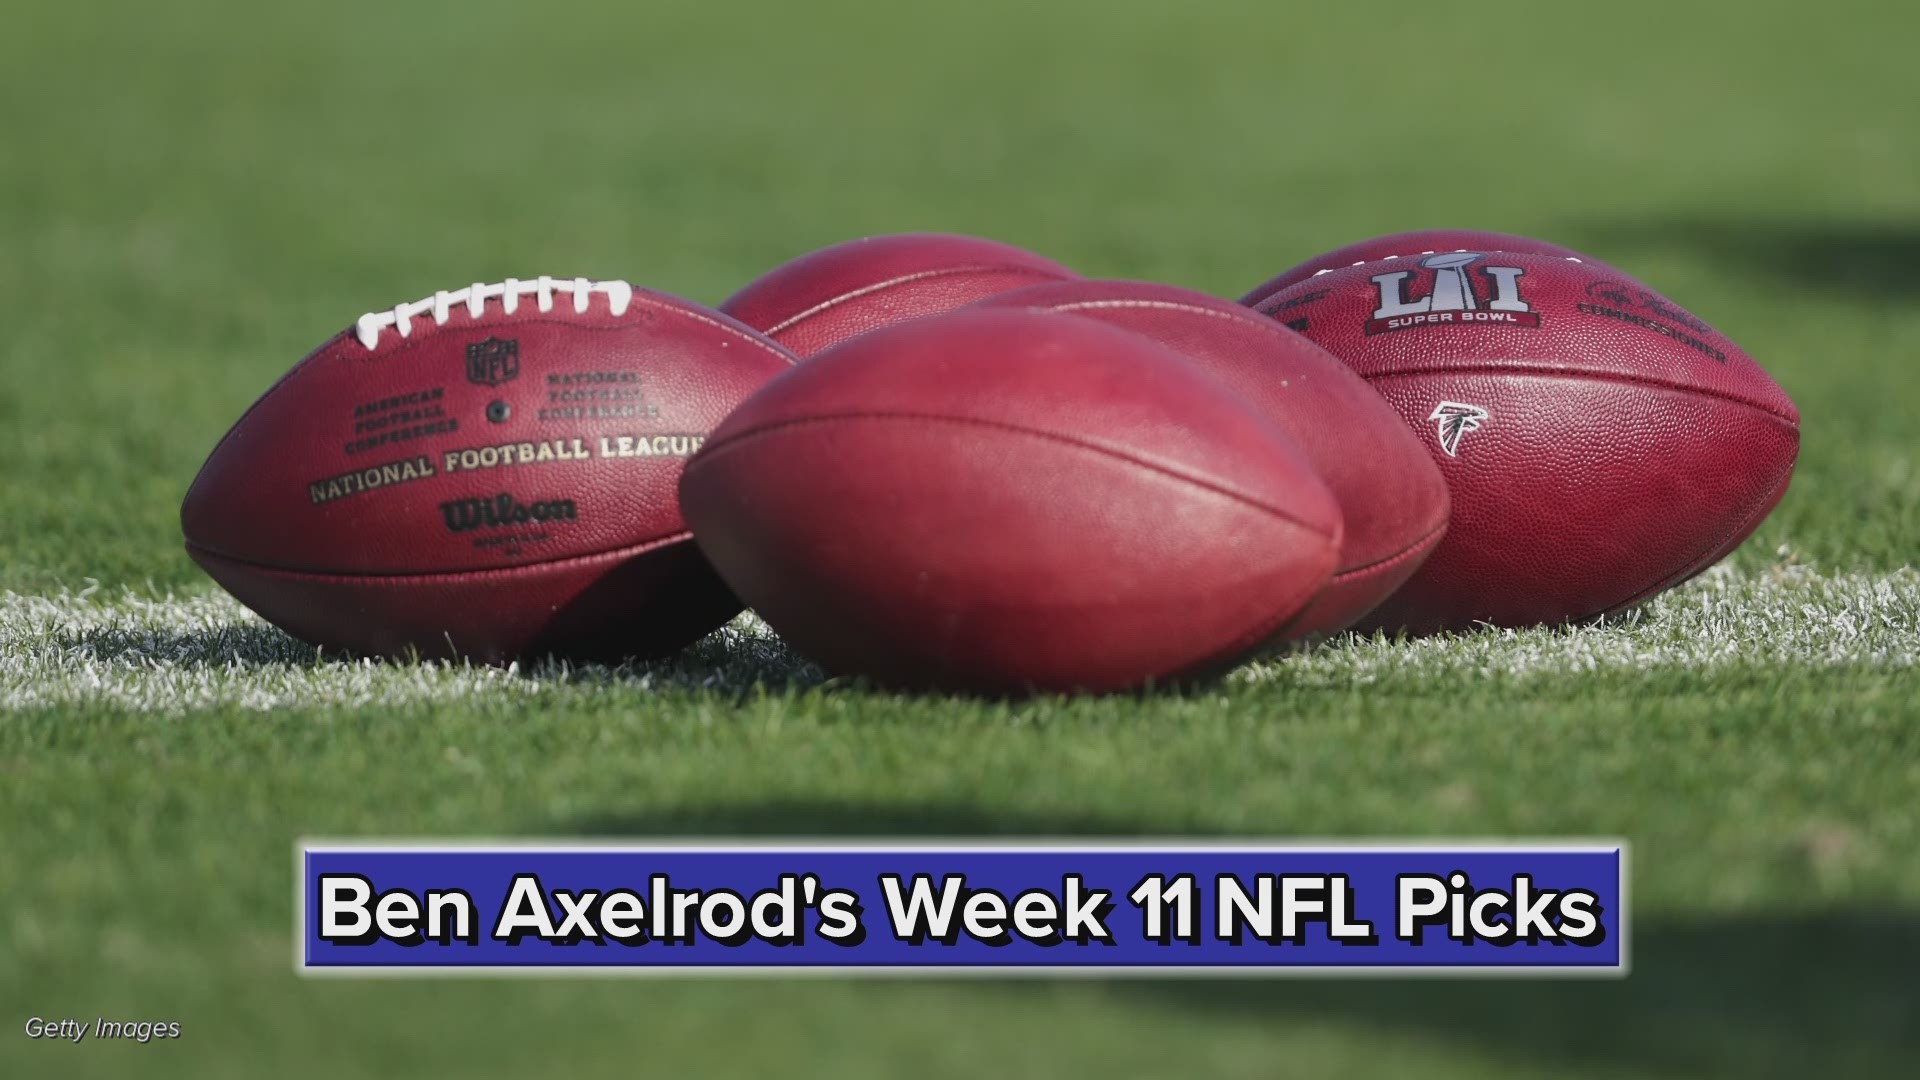 Ben Axelrod's Week 11 NFL Picks: Seahawks beat Packers, Panthers top Lions